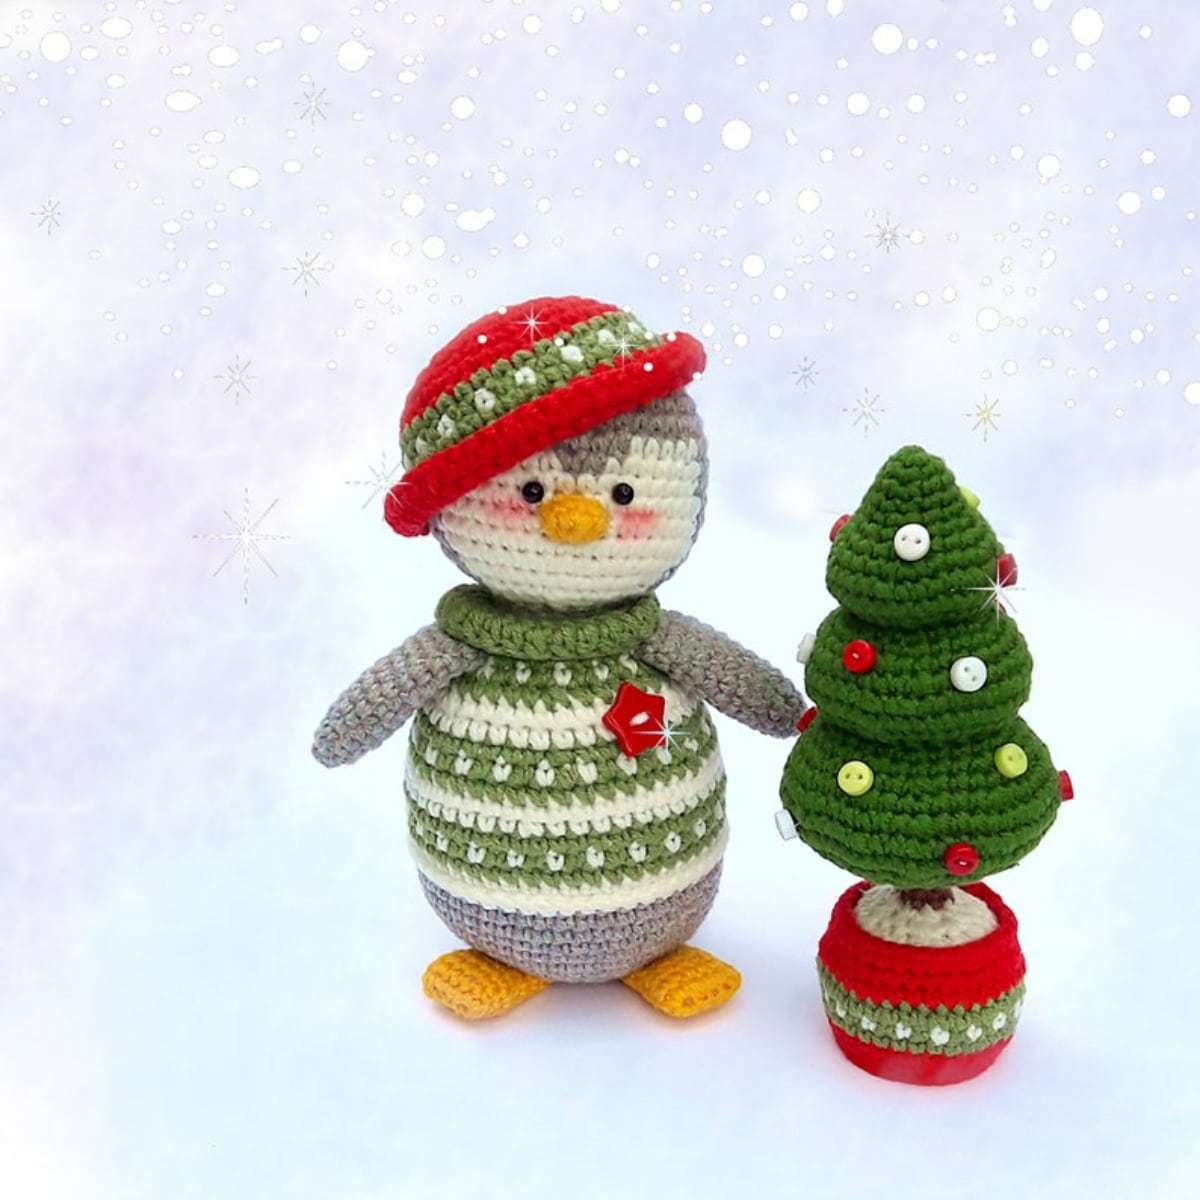 Small crochet penguin in a green and cream striped jumper with a red bowler hat standing next to a small crochet Christmas tree in a red bucket.